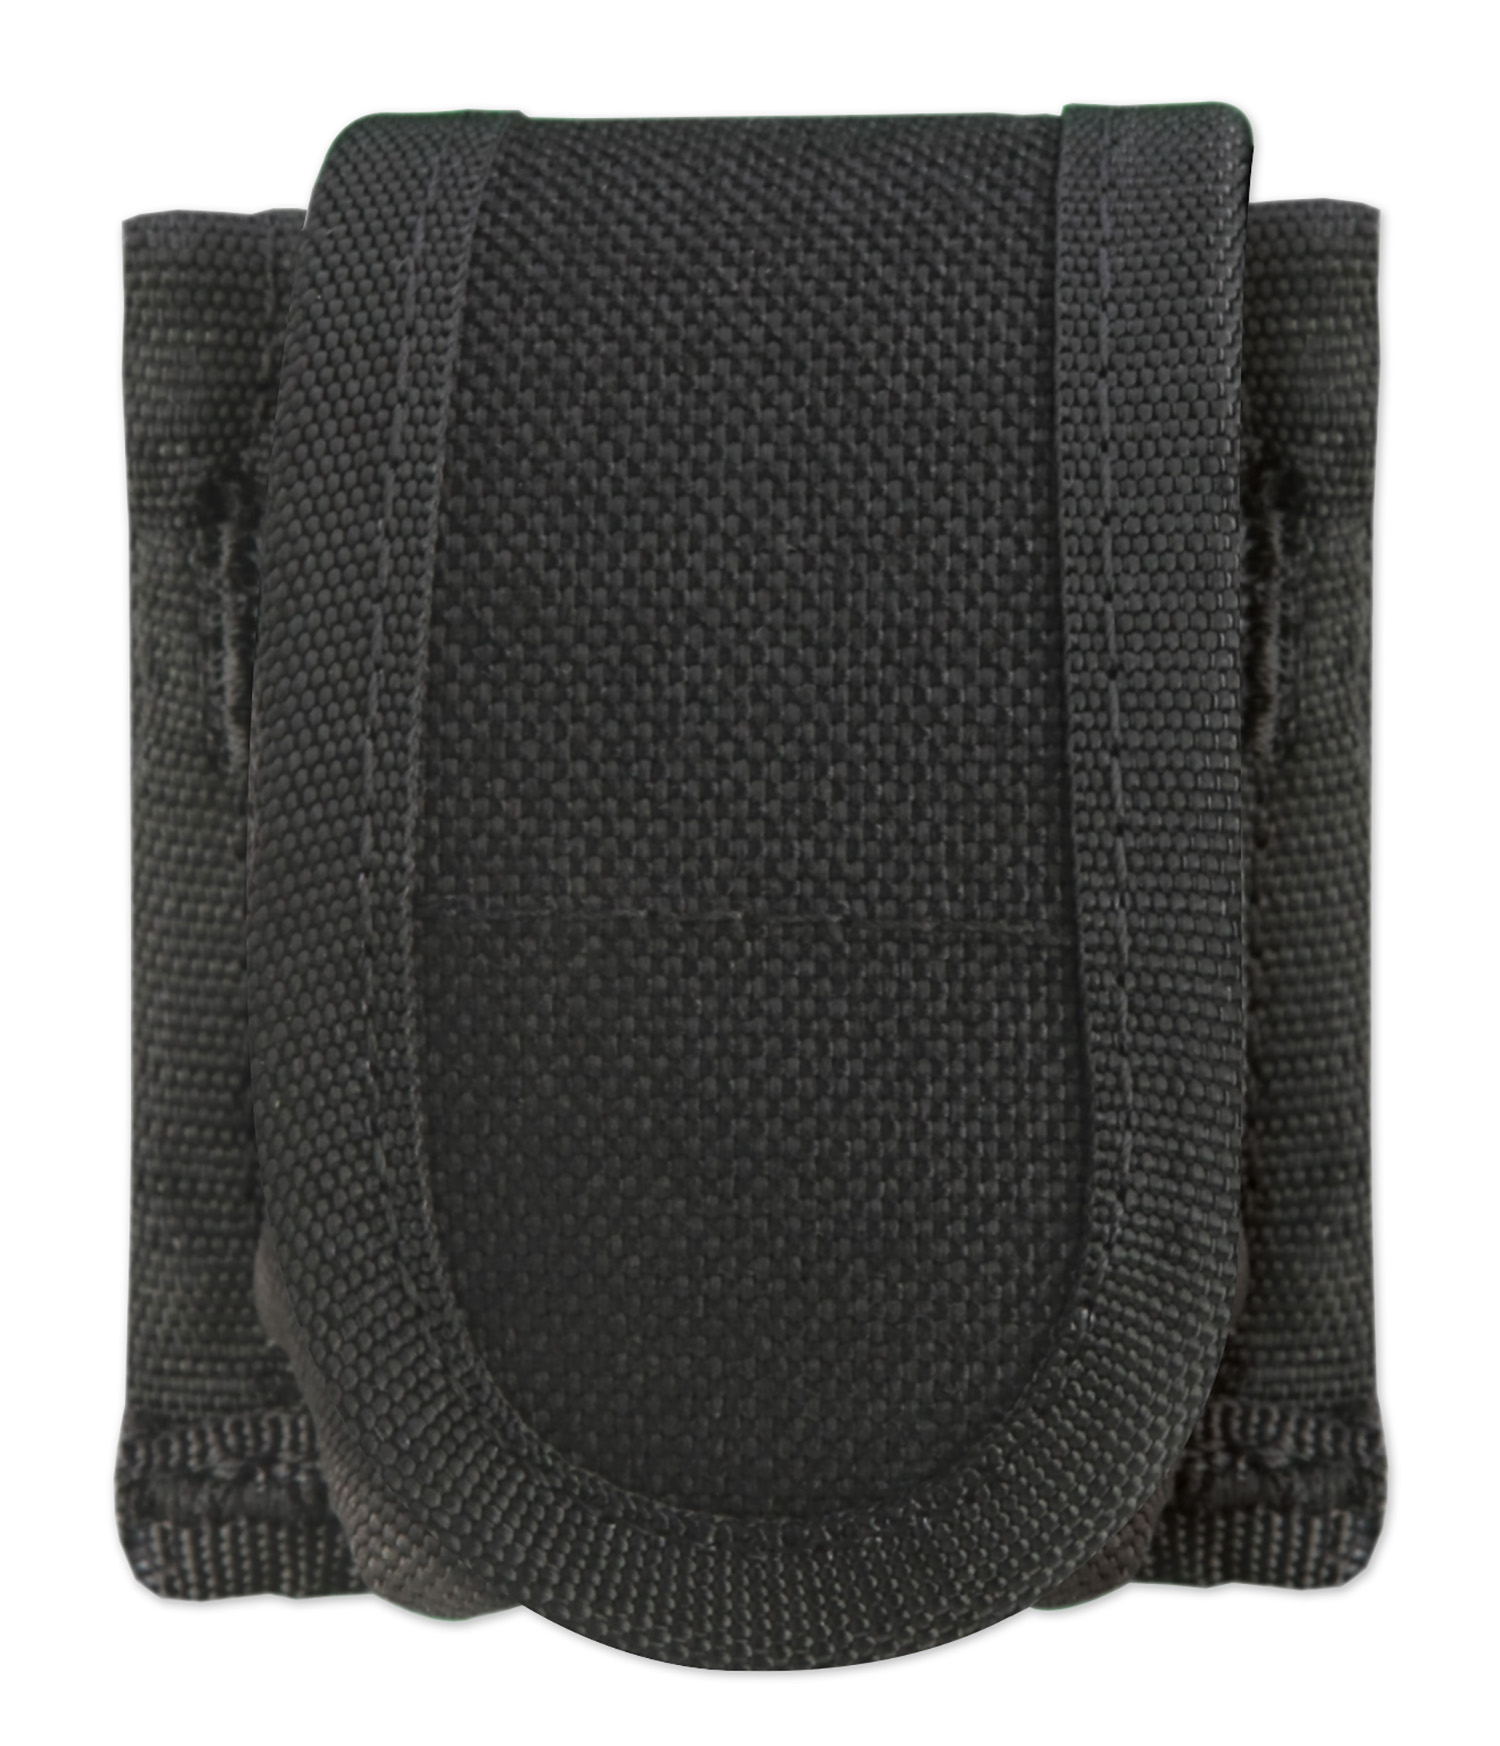 Uncle Mikes 8827 Universal SpeedLoader Pouch Black Nylon